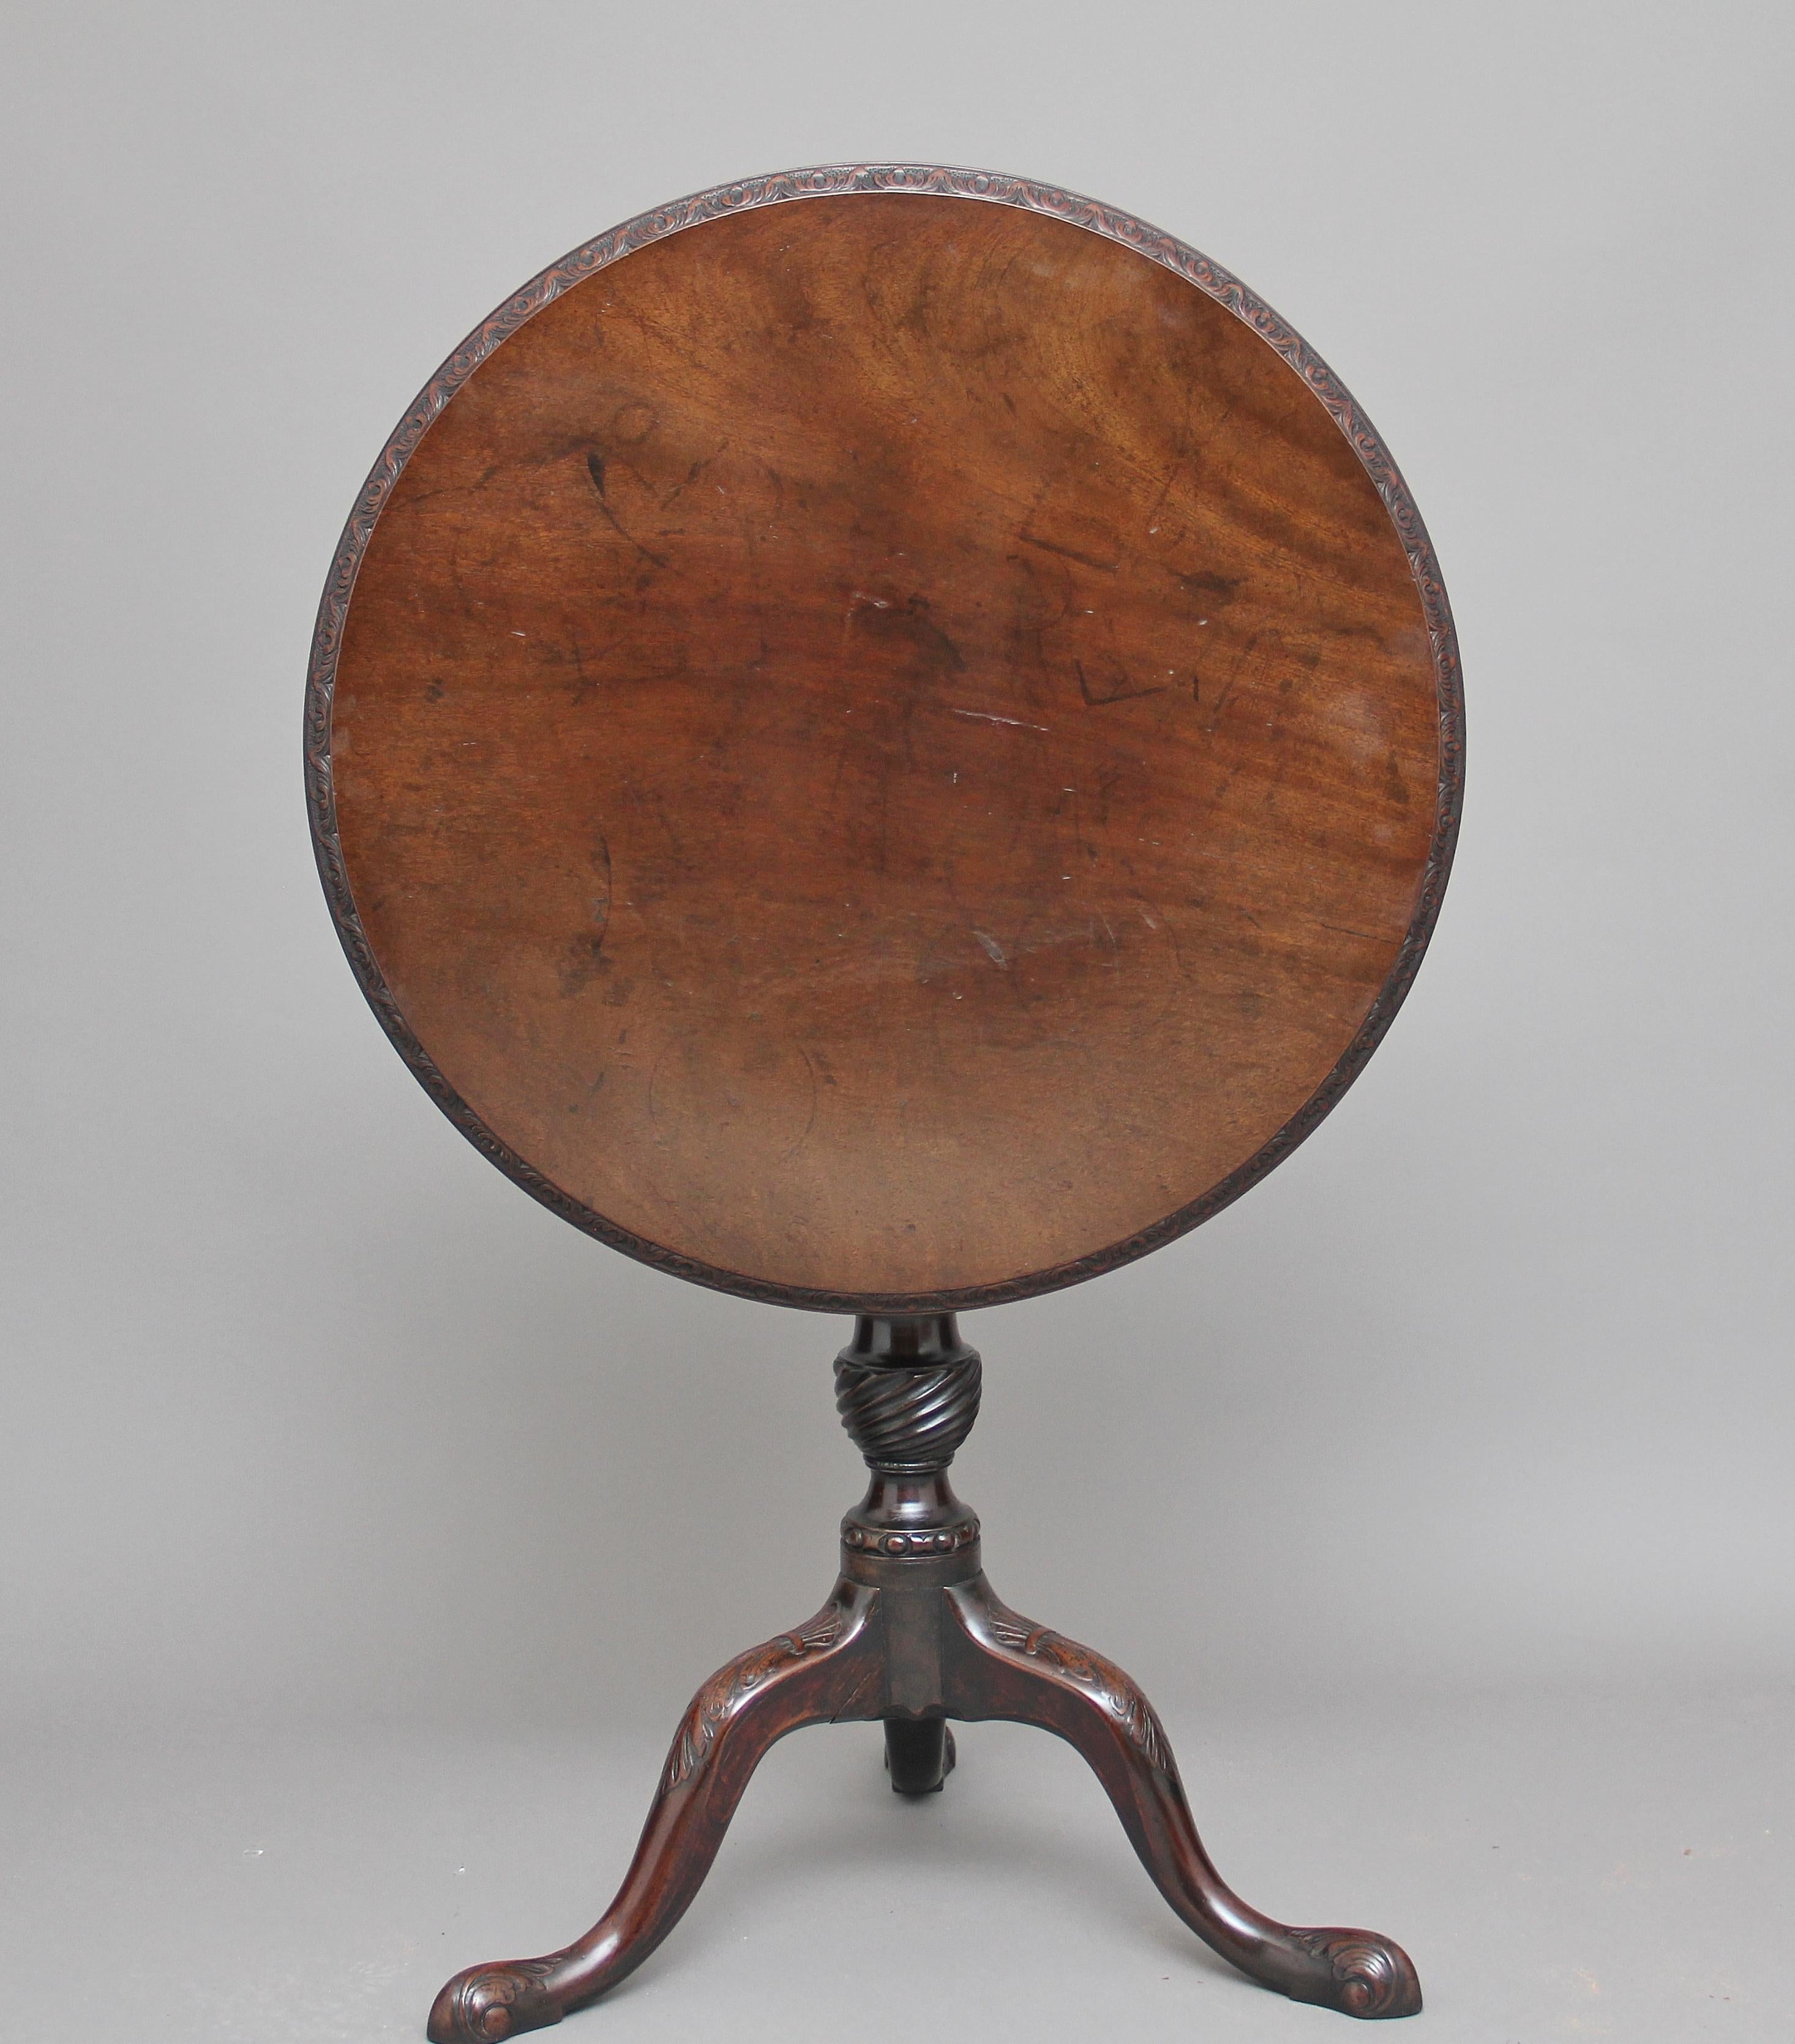 A lovely quality 18th century carved mahogany tripod table, the circular top having an ornate carved edge, sitting on a birdcage mount so you can turn the top without turning the base, supported on wonderfully turned and carved column terminating